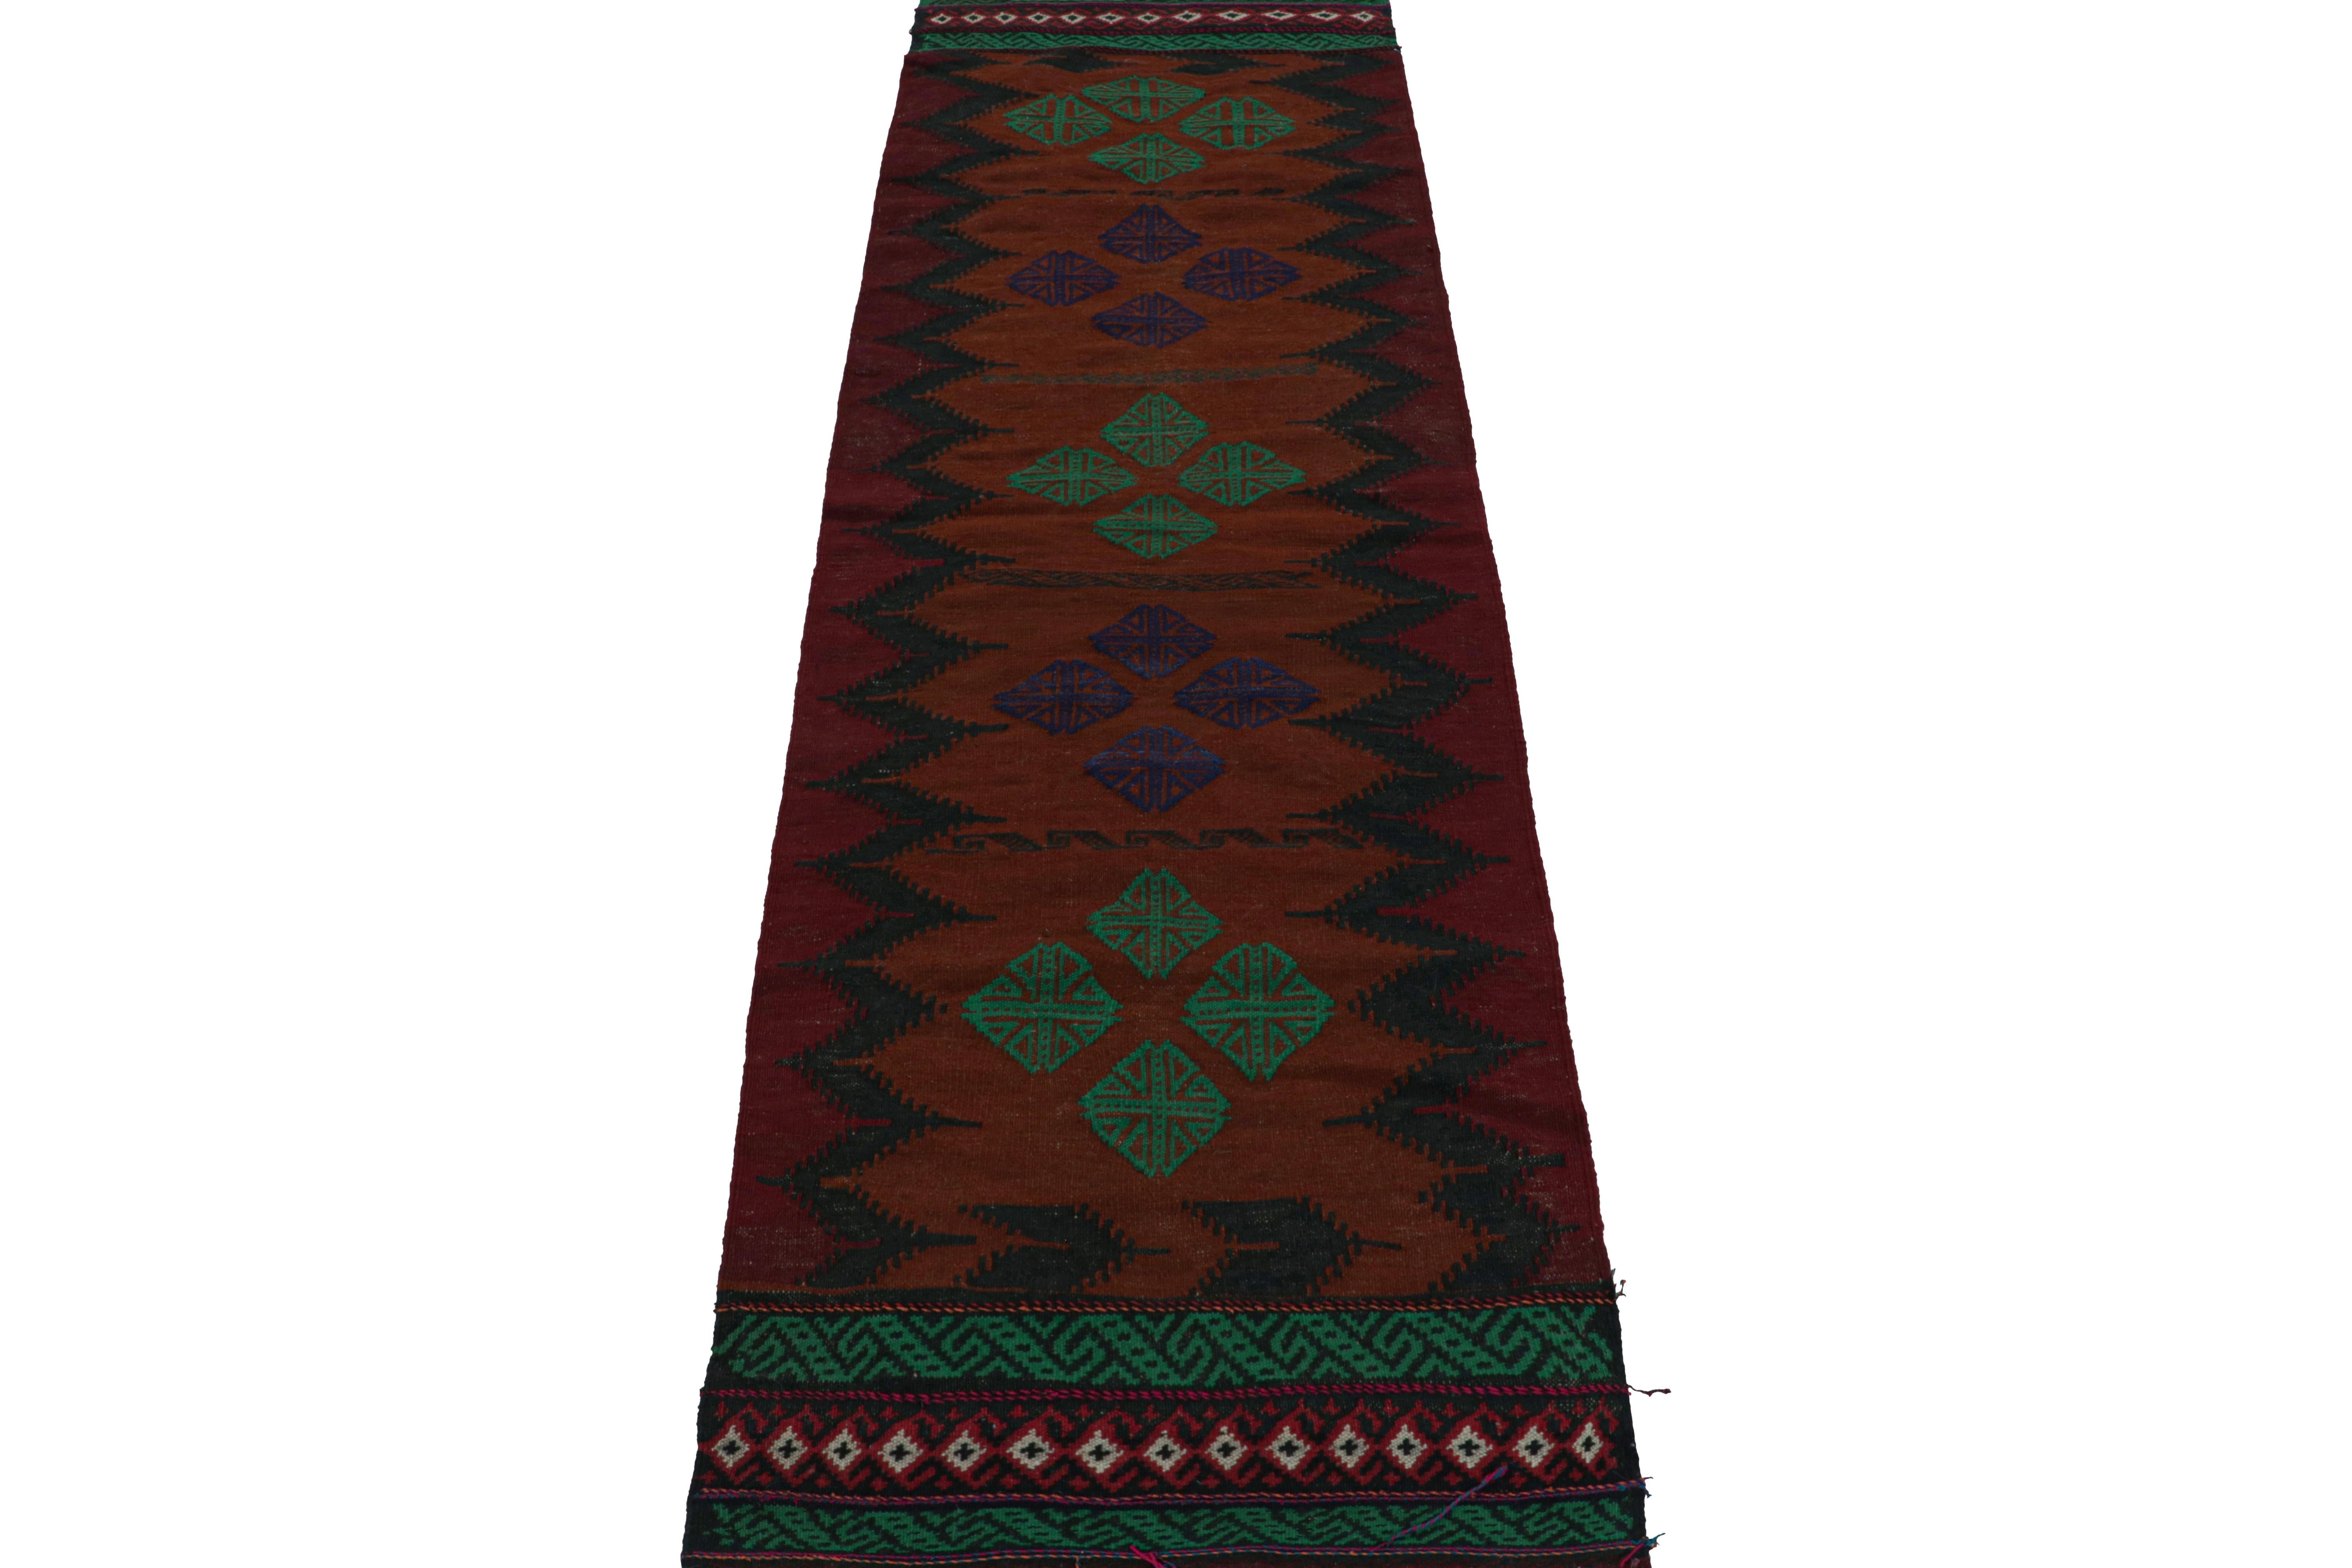 Hand-Knotted Vintage Afghan Tribal Kilim in Rust Tones Geometric Patterns, from Rug & Kilim For Sale